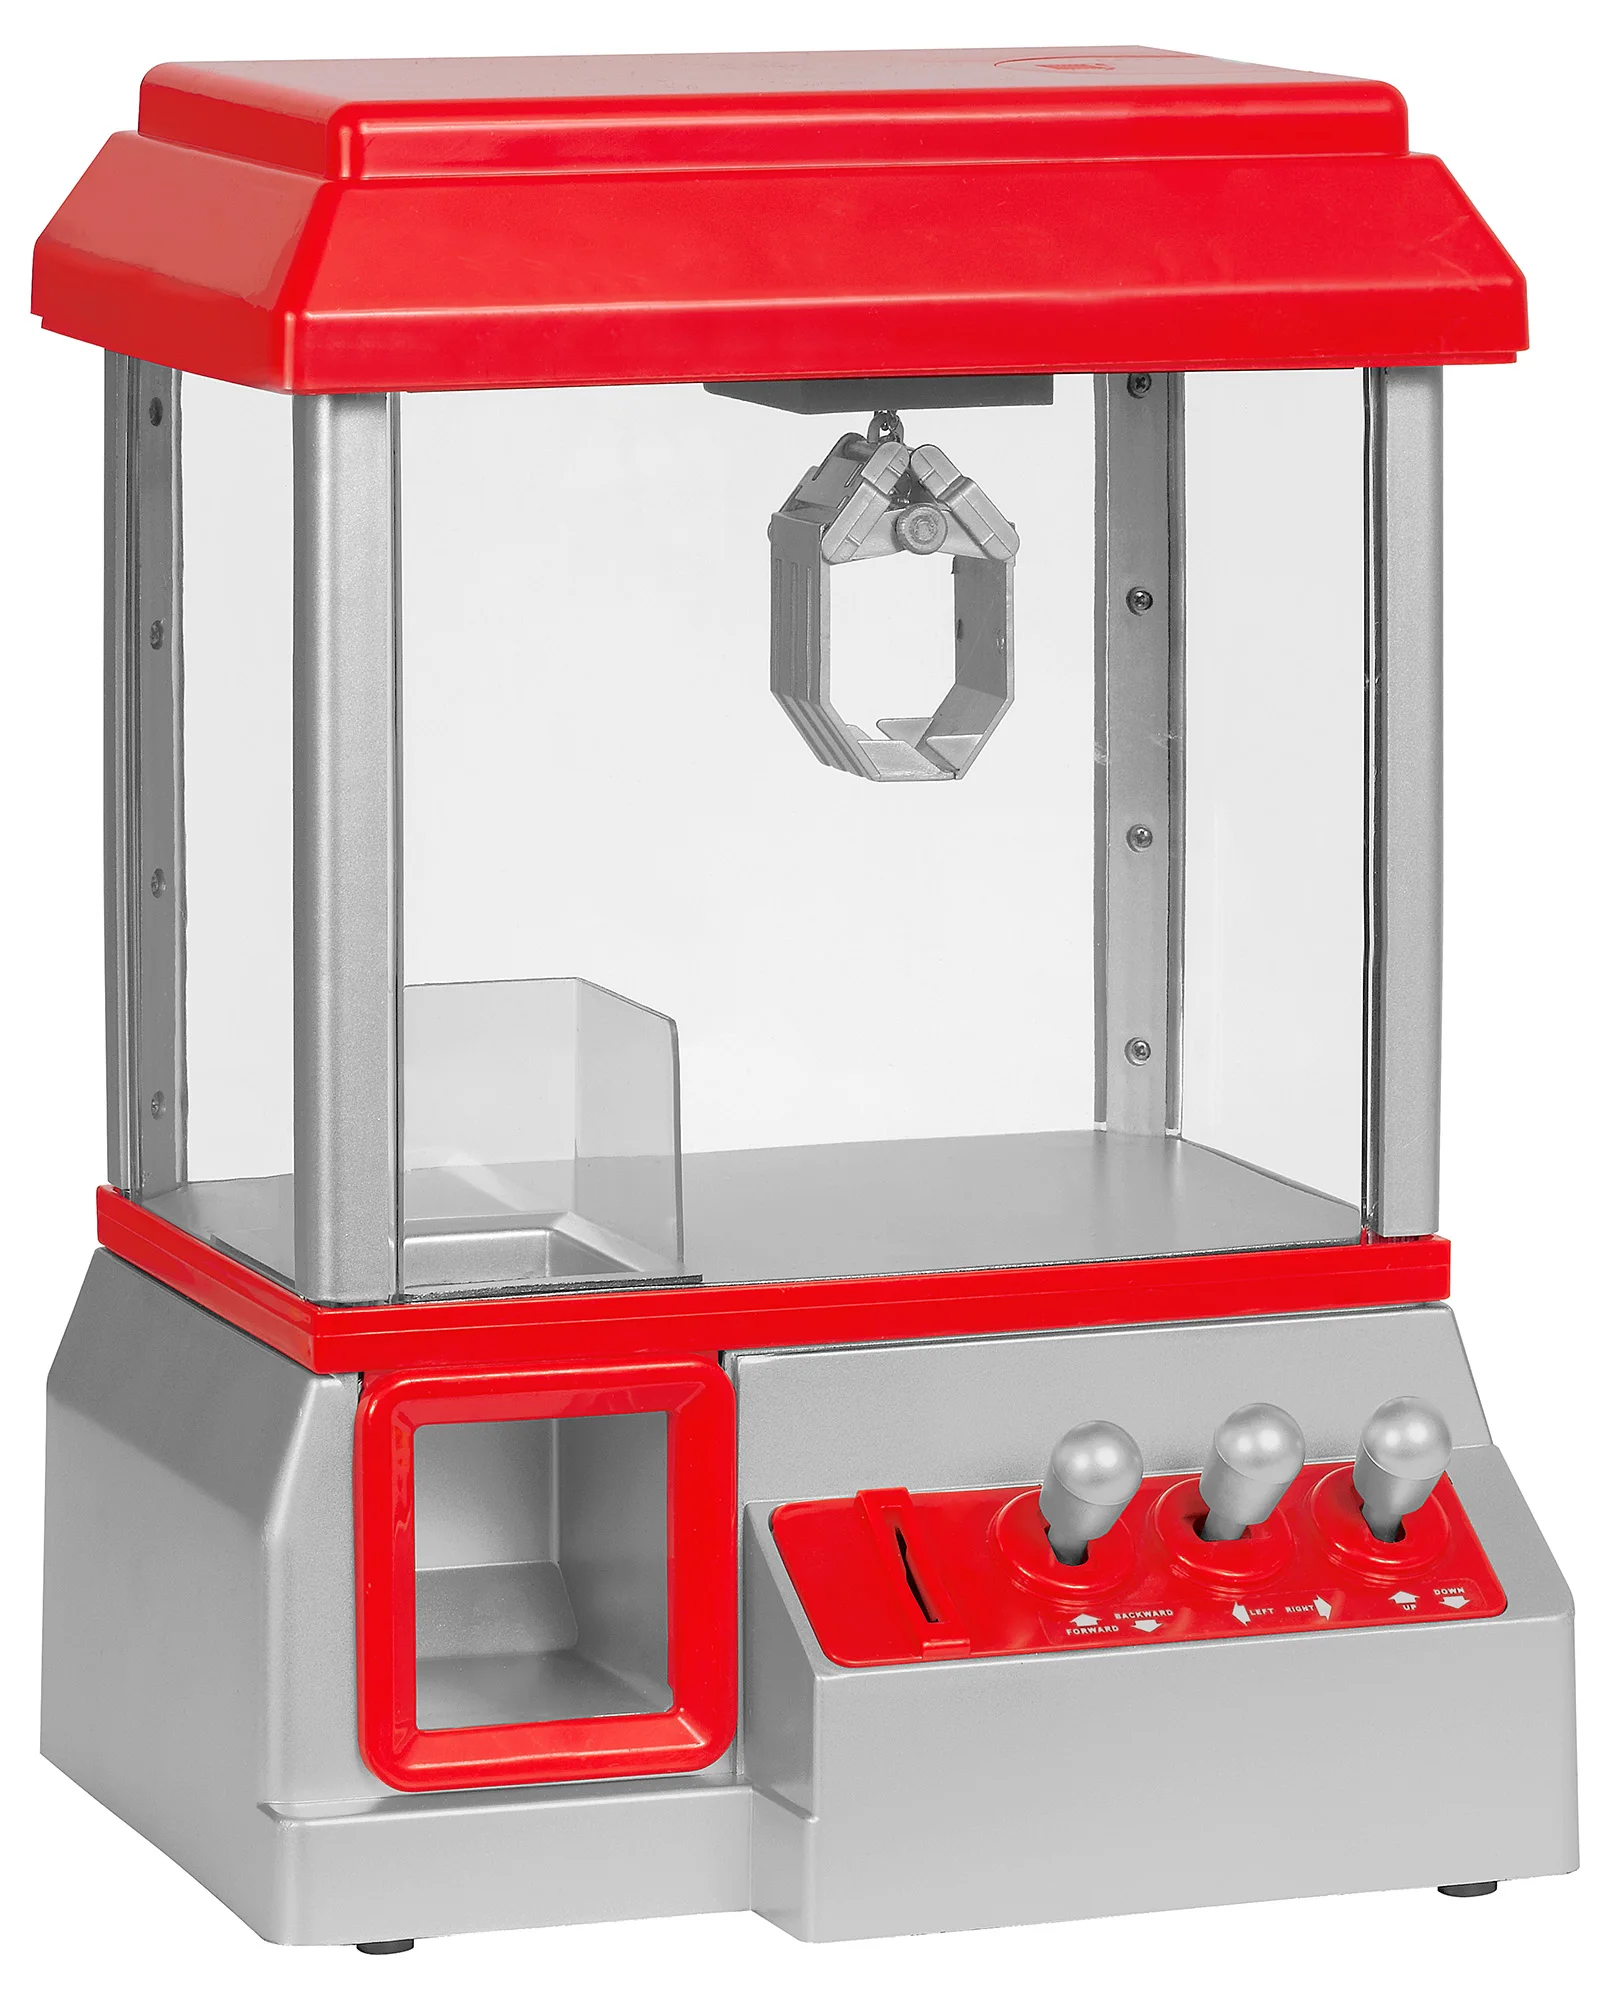 B/O candy grabber with music, candy machine, candy toy